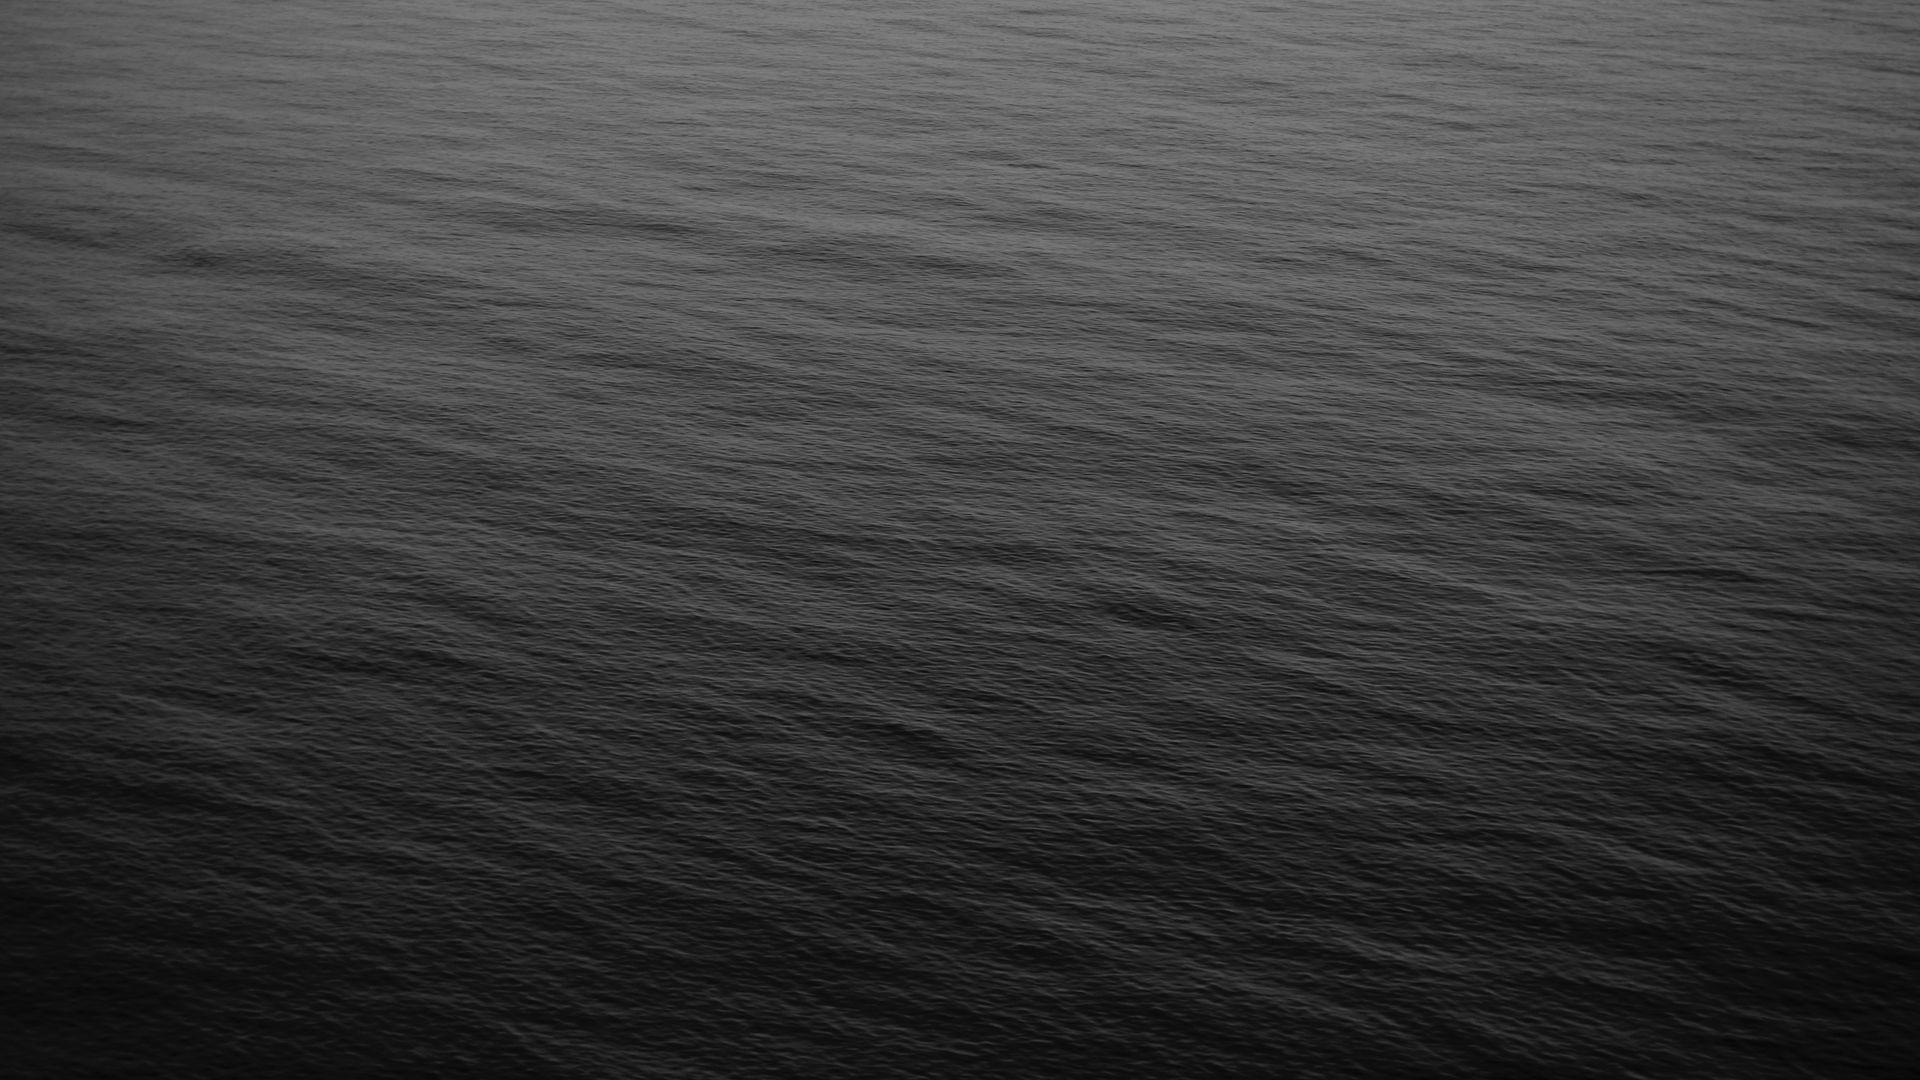 500 Dark Sea Pictures HQ  Download Free Images  Stock Photos on  Unsplash